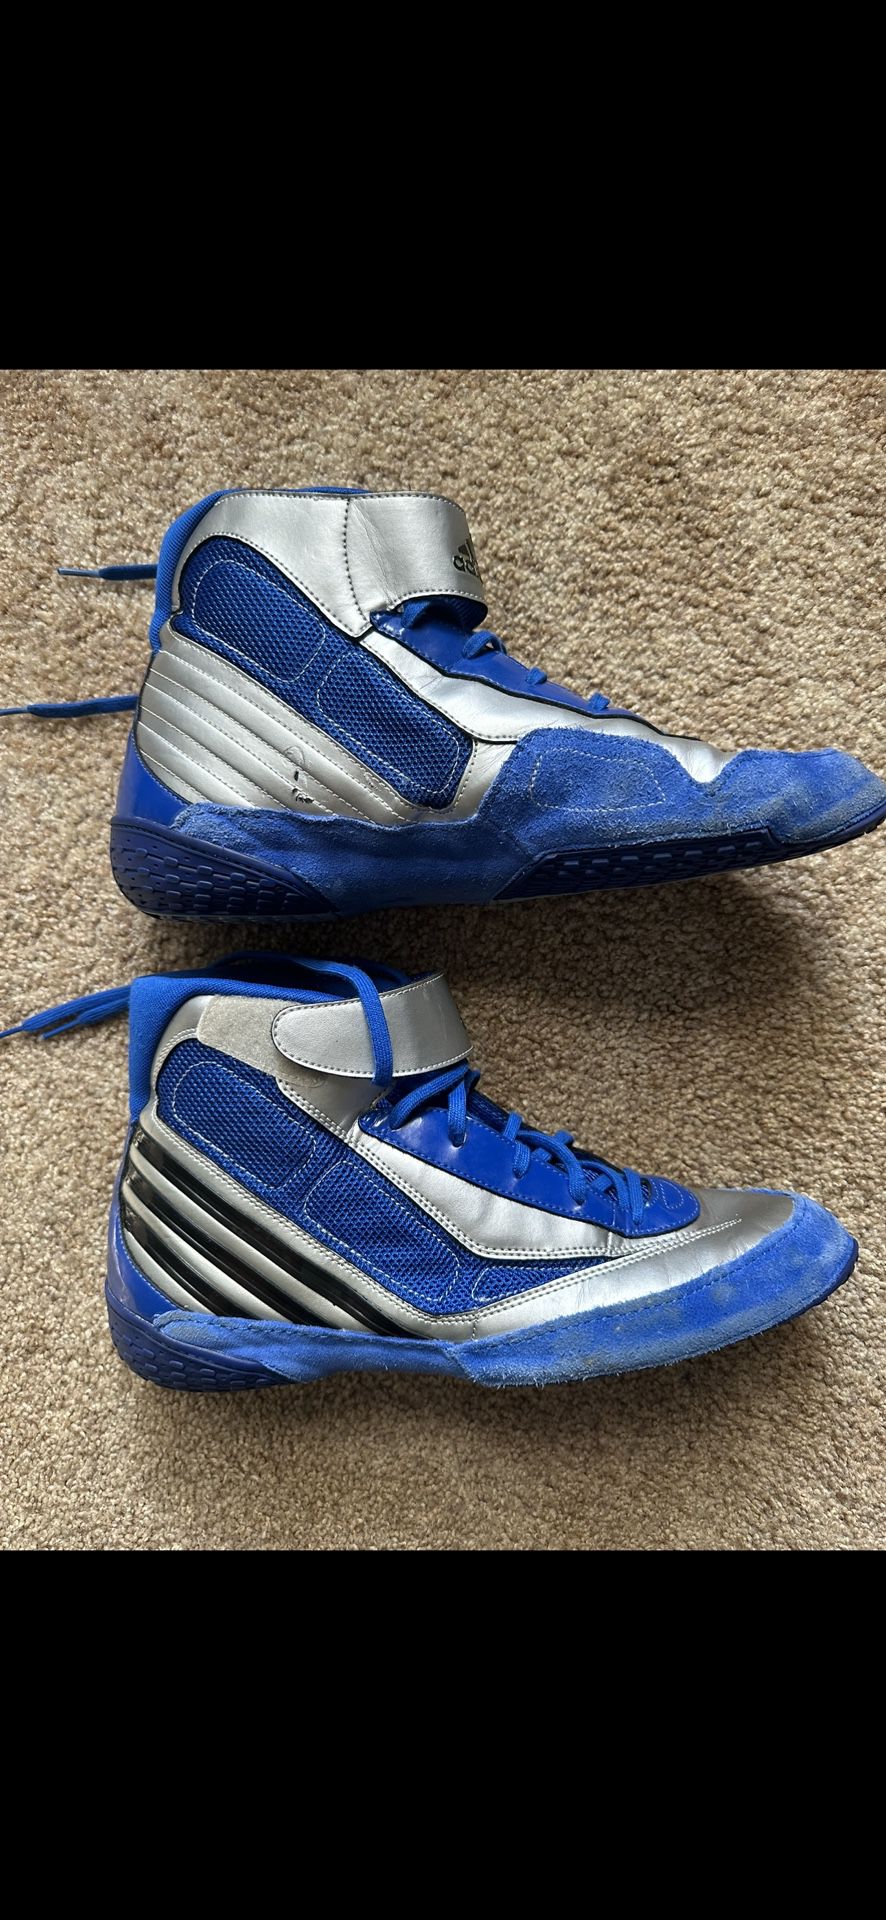 Adidas Tyrint 5.0 Wrestling Shoes Silver Blue Men’s Size 11.5 